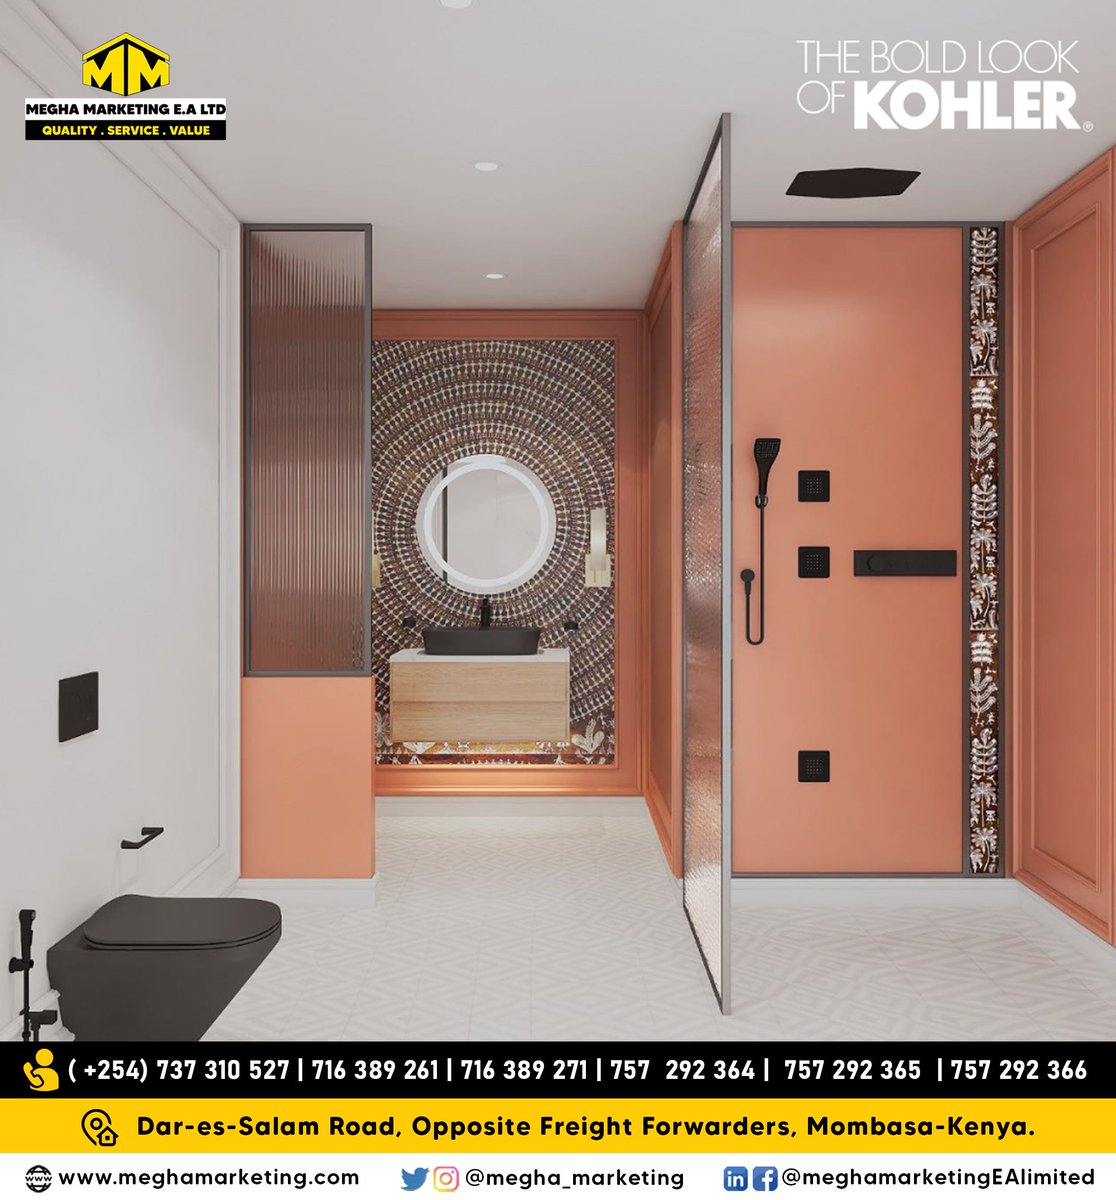 Elevate your bathroom space with this #KohlerBoldLook featuring exquisite and intricate Warli art.

With Kohler's Vitality Mirror as the centerpiece, the...instagram.com/p/C1vyaCxoNwm/